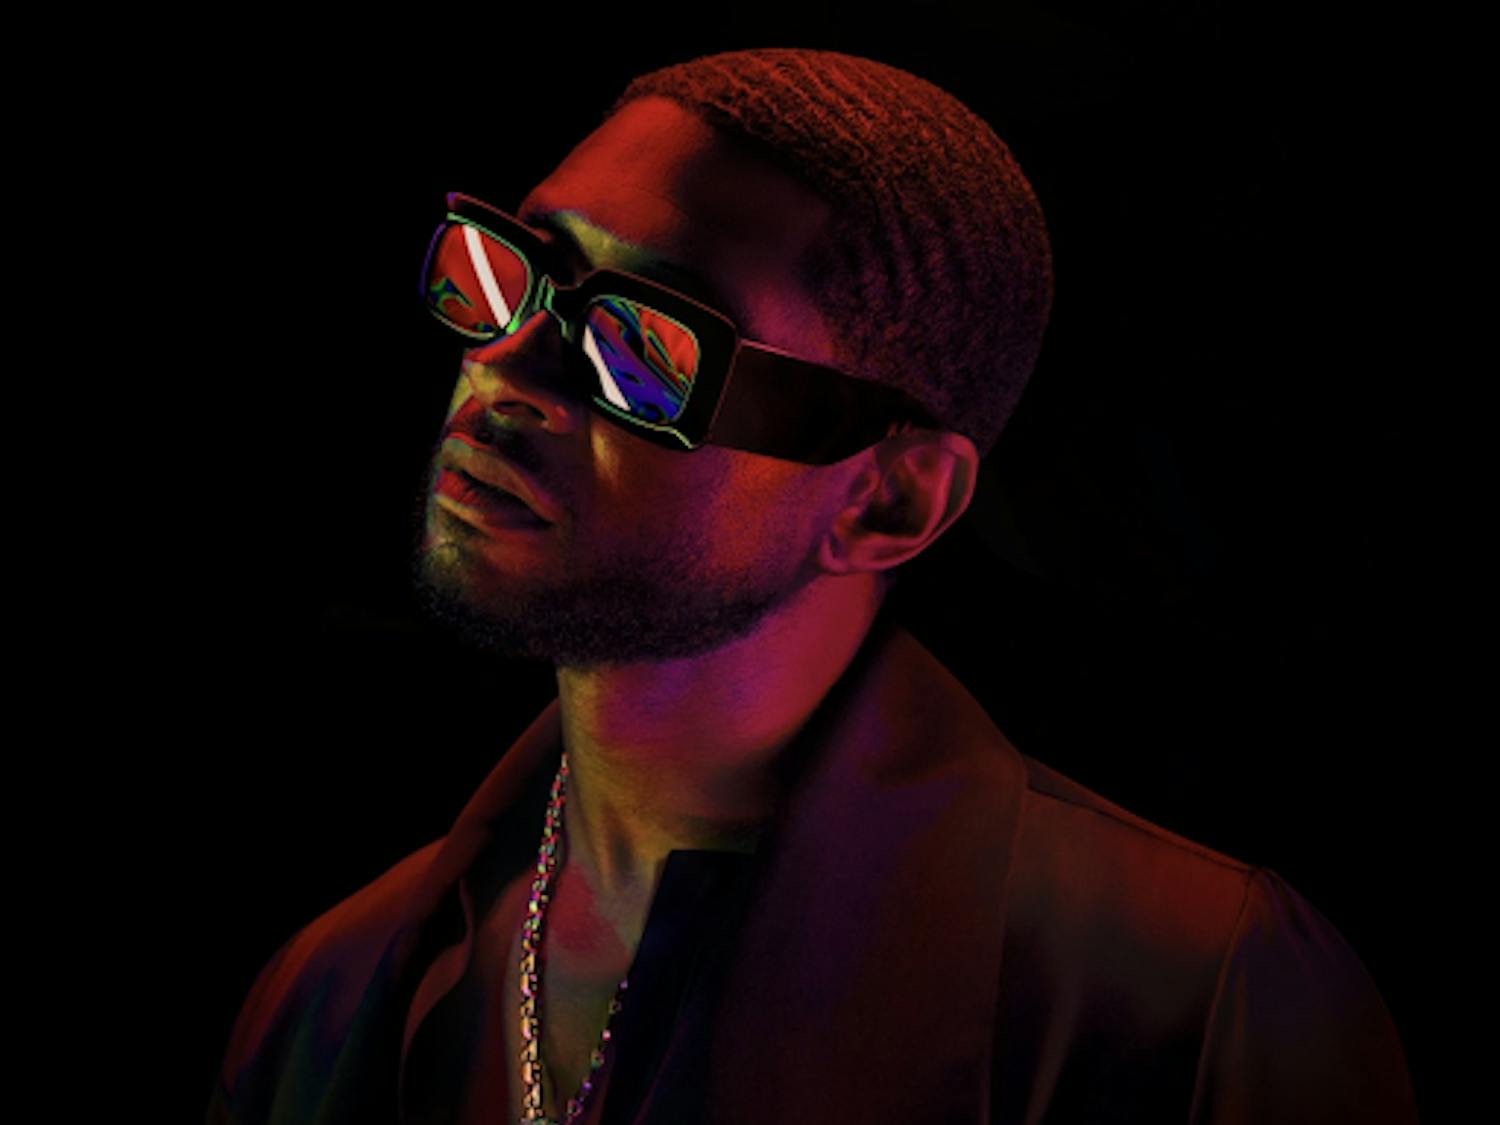 In 2004, Usher’s album “Confessions” made him one of the best-selling artists of the decade. (Photo courtesy of Apple Music)